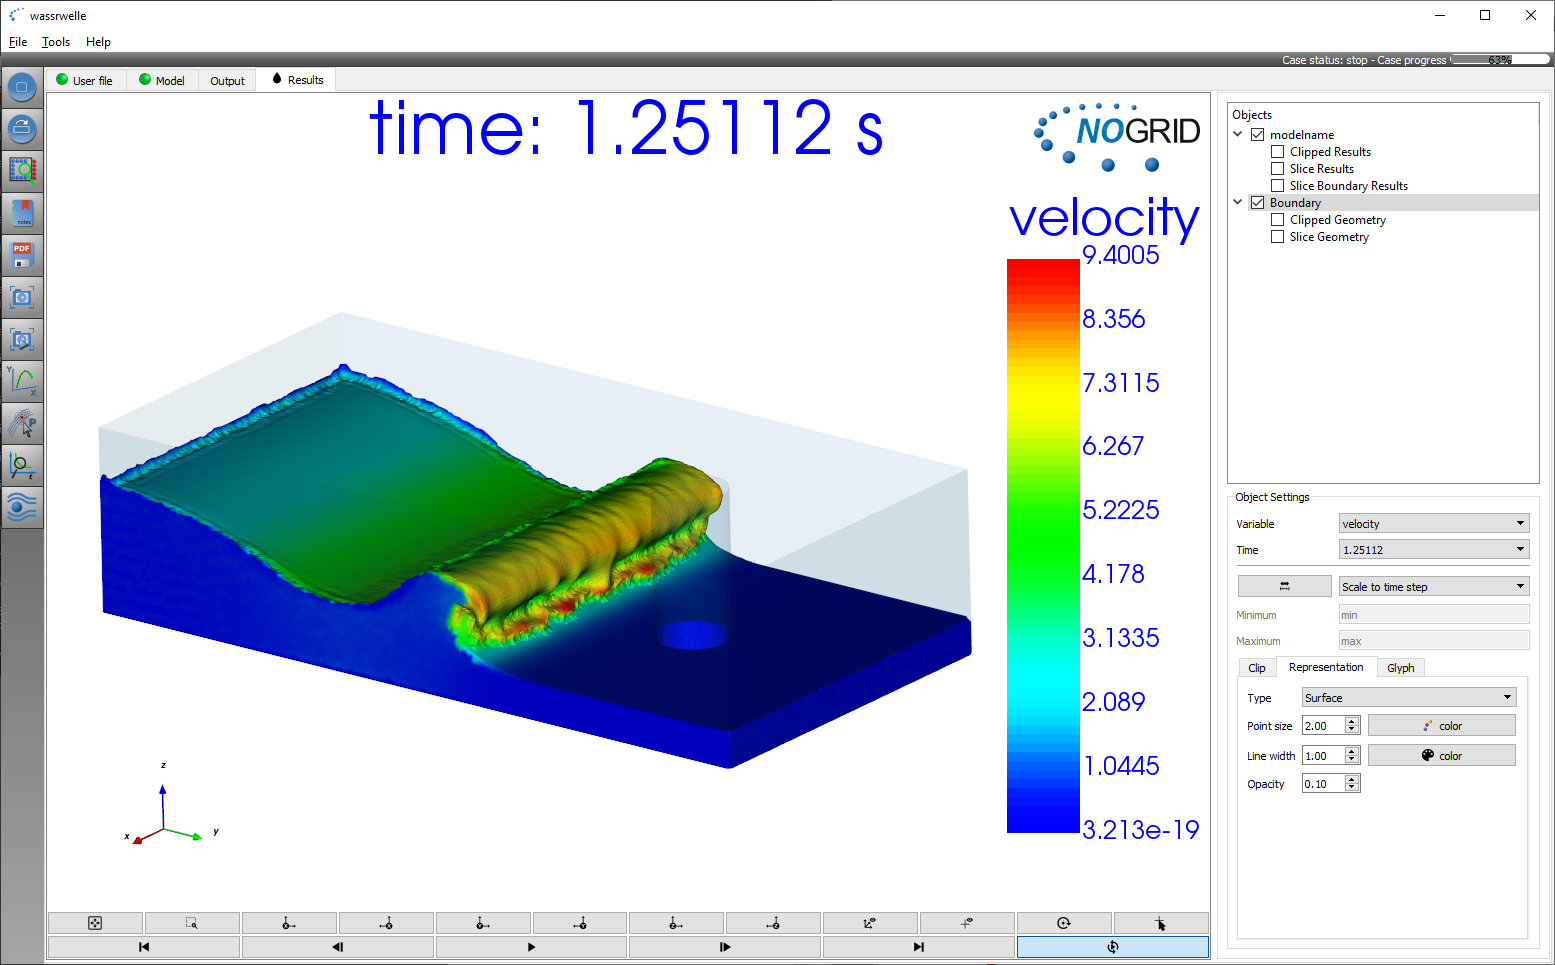 Water wave around cylinder simulation results in NOGRID points' GUI